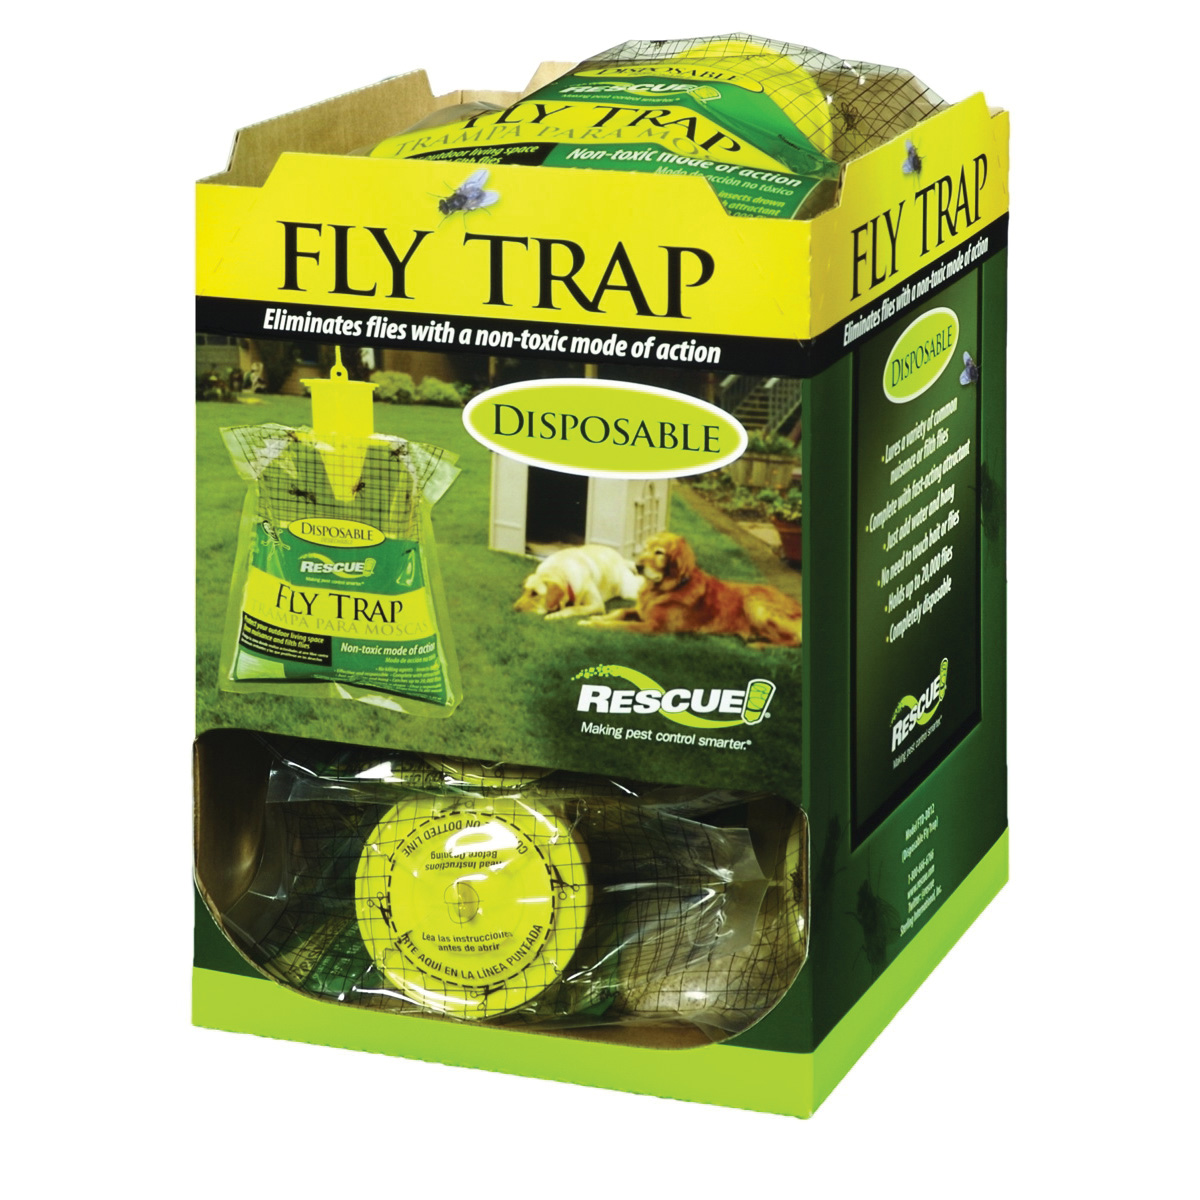 RESCUE FTD-DB12 Fly Trap, Solid, Musty - 3